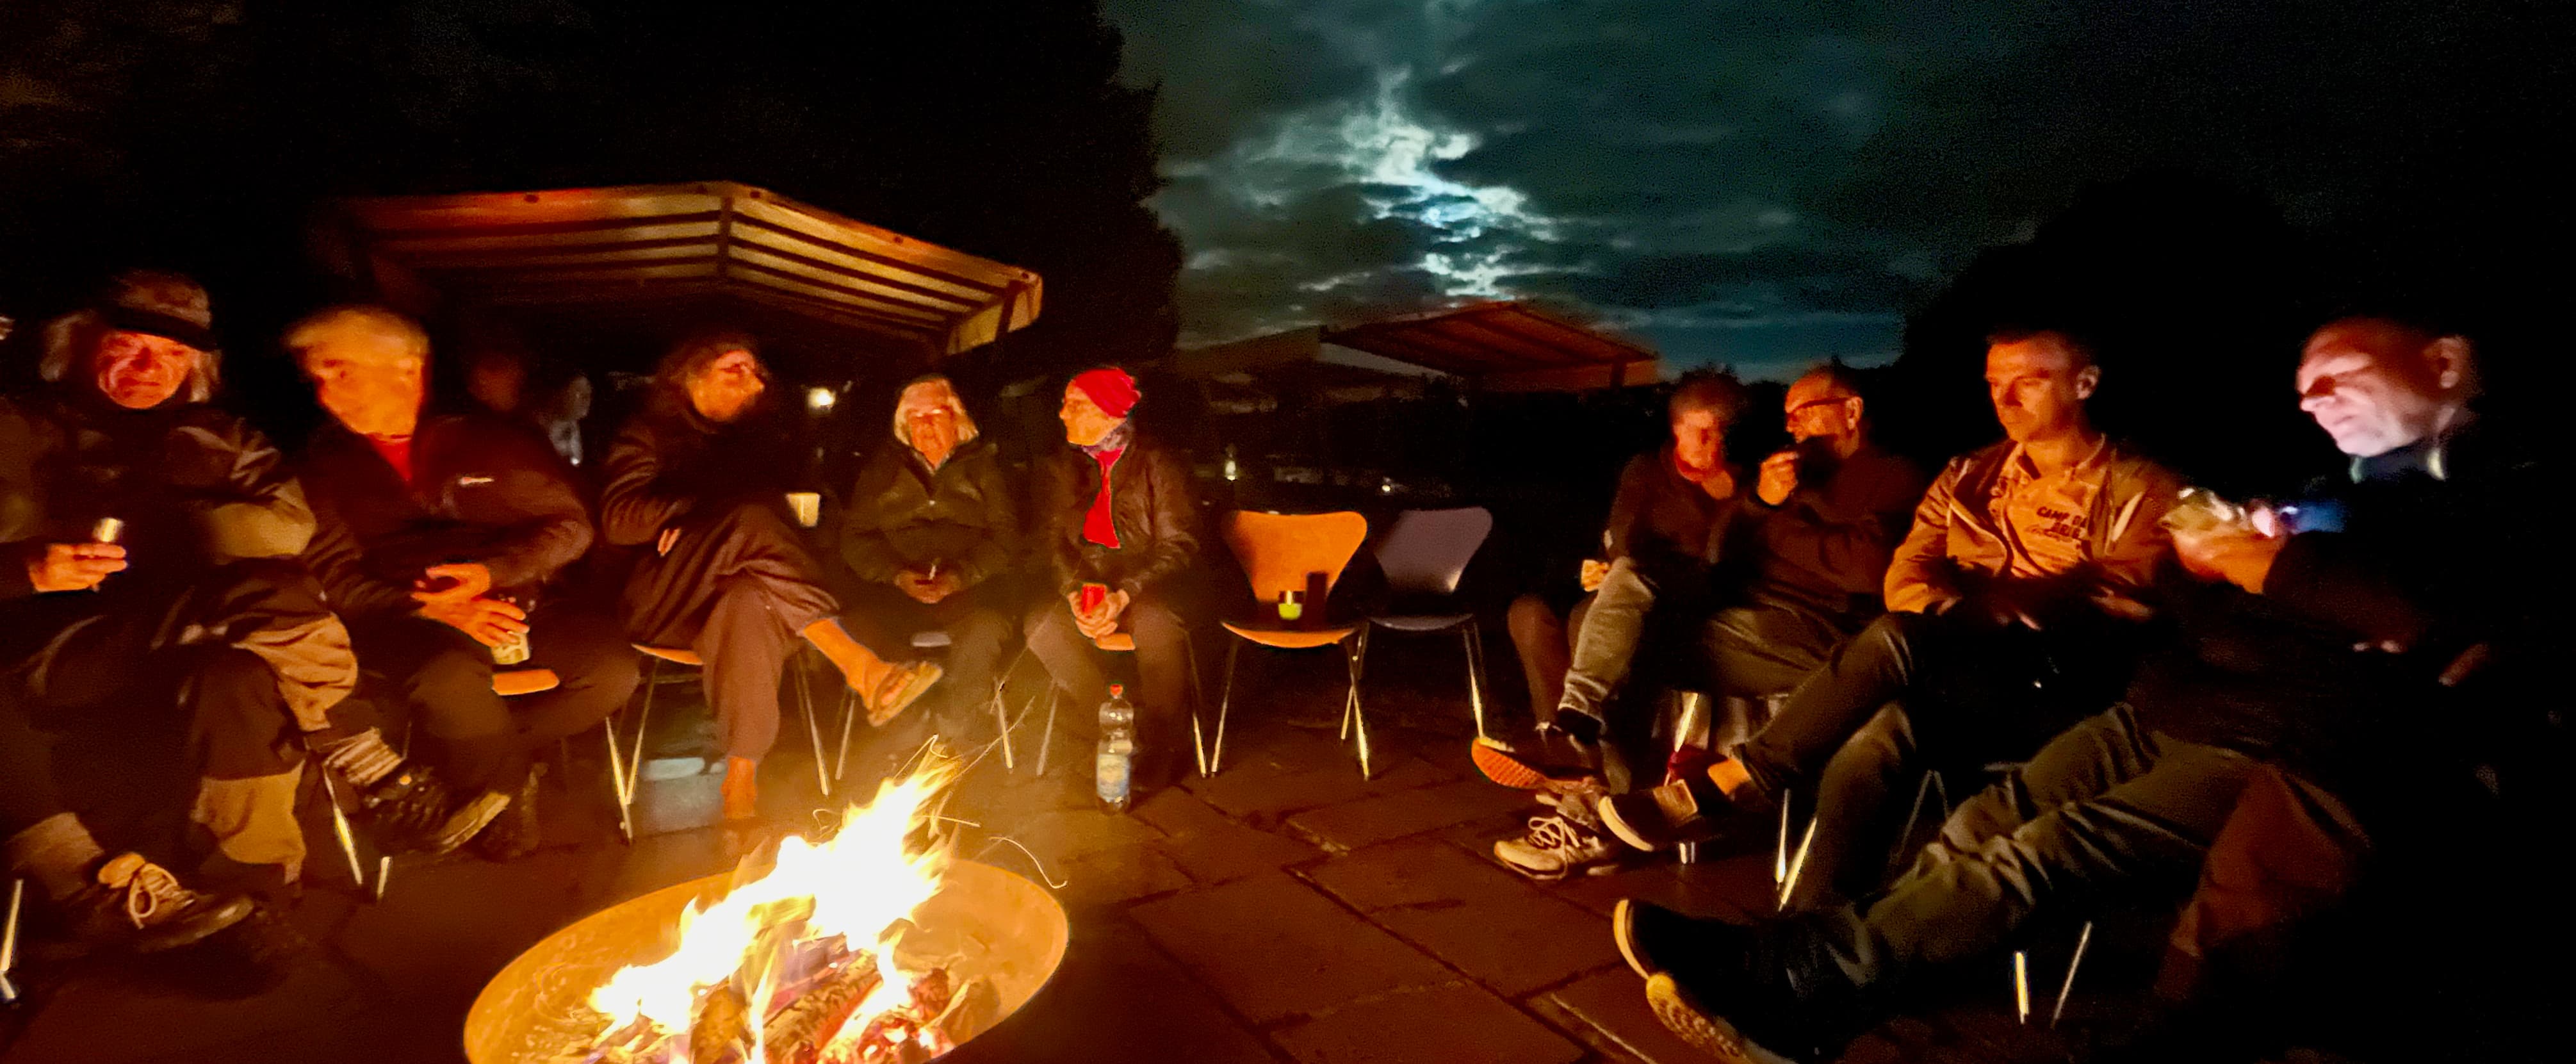 A group of cyclists sitting around a firepit